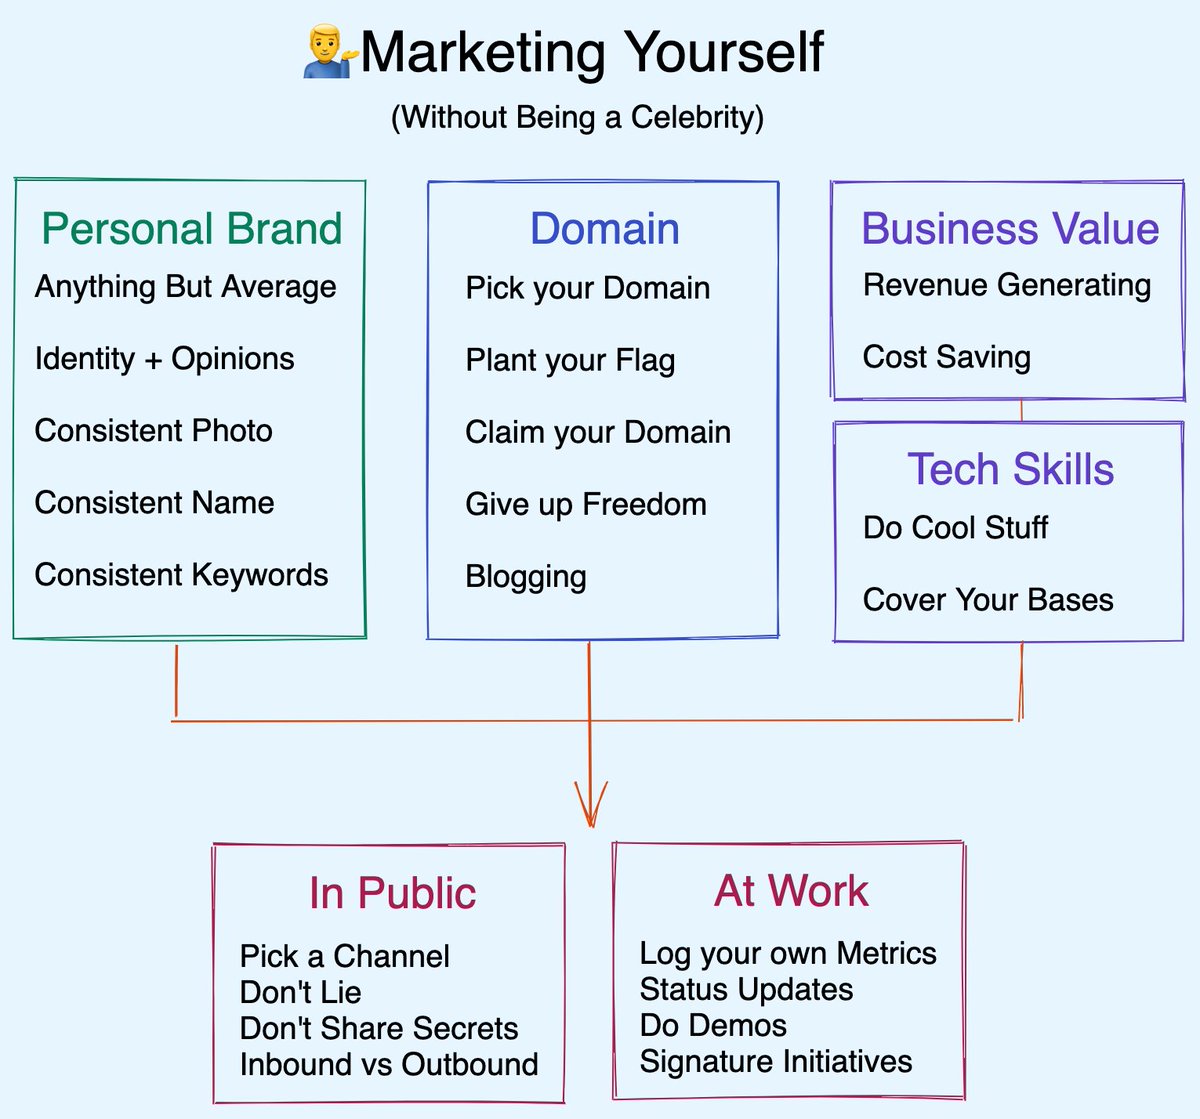 How to Market Yourself (without Being a Celebrity): https://www.swyx.io/writing/marketing-yourself/